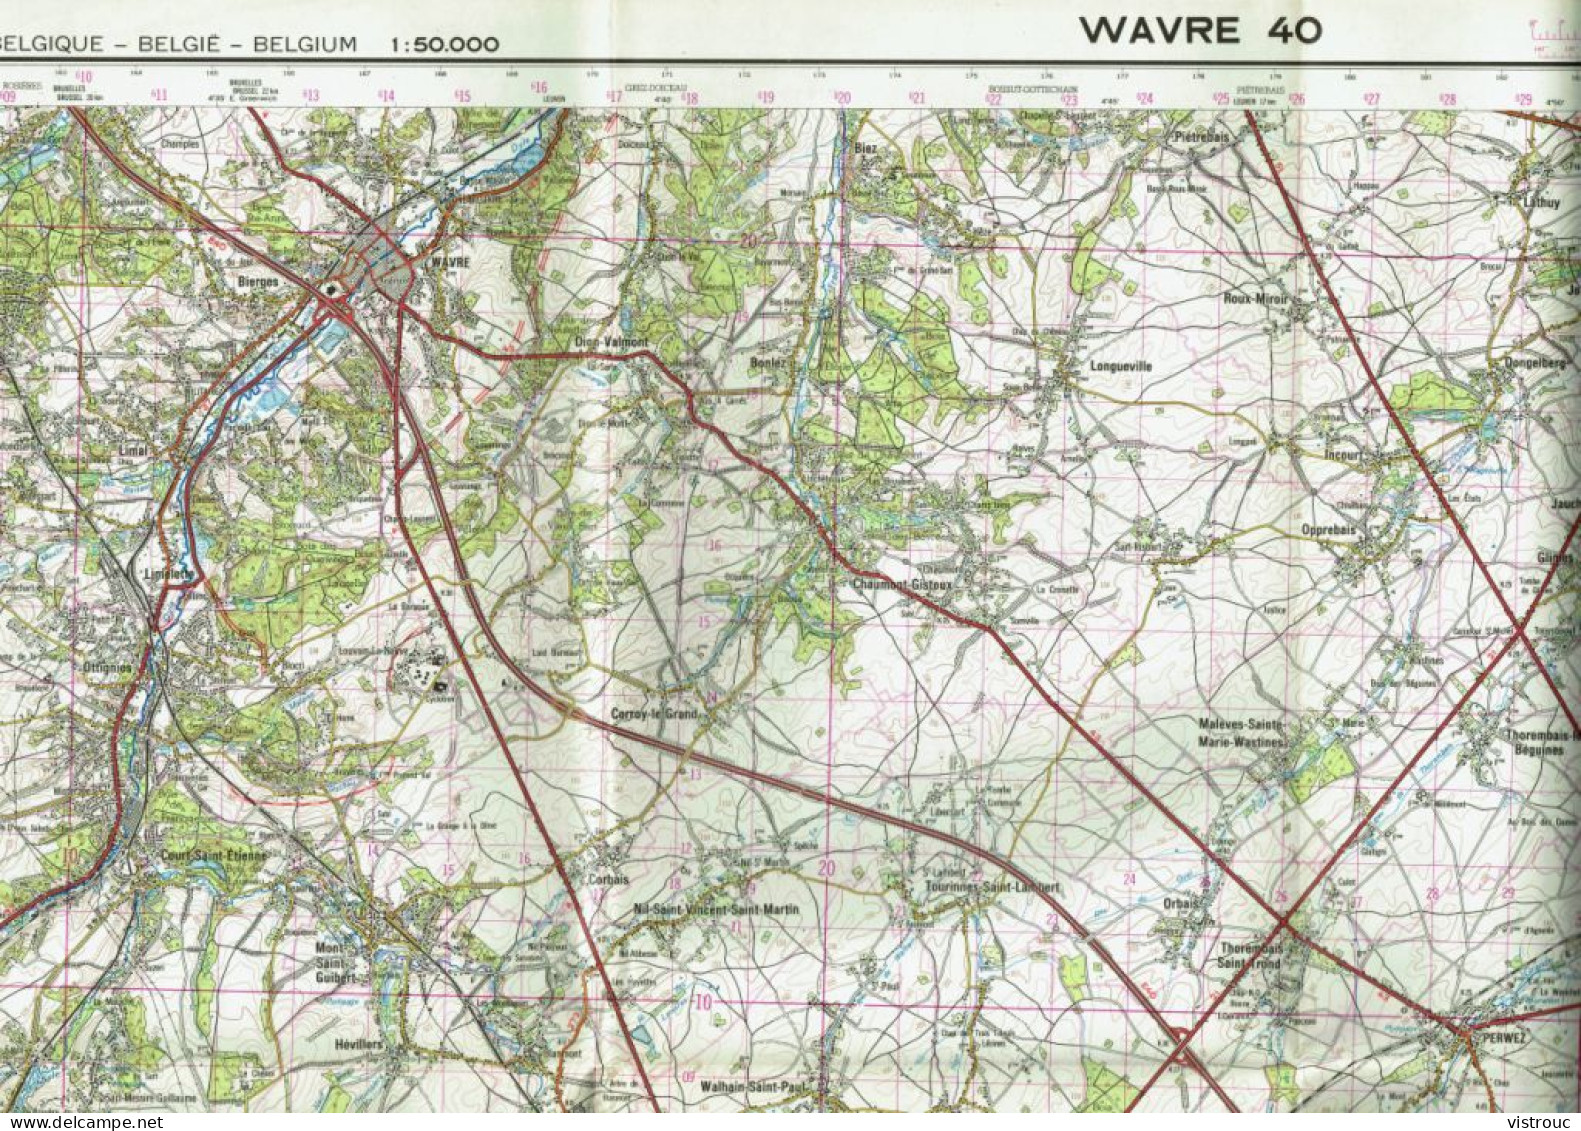 Institut Géographique Militaire Be - "WAVRE" - N° 40 - Edition: 1974 - Echelle 1/50.000 - Topographical Maps